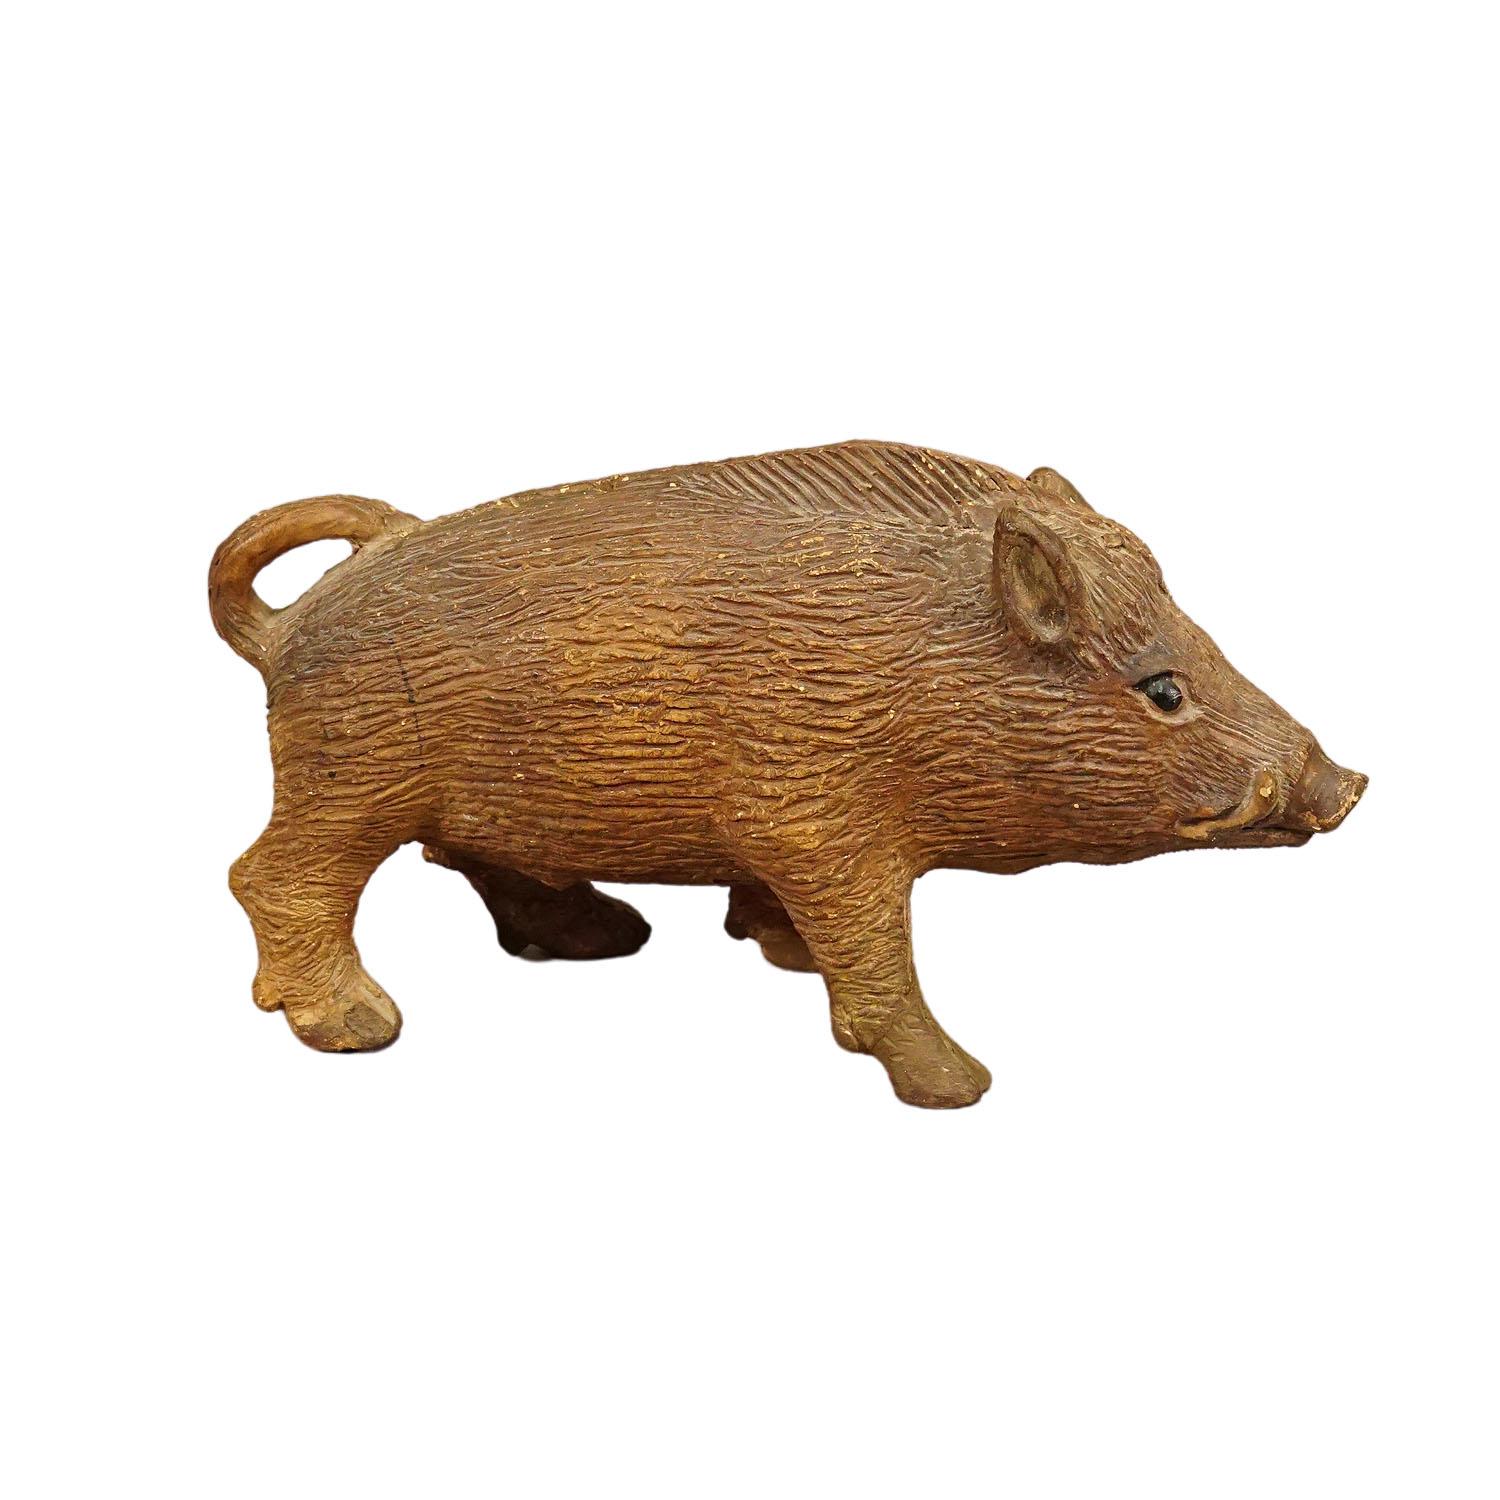 Antique Wild Boar Piggy Bank Made of Clay

An antique piggy back in the shape of a wild boar. Handmade of clay. It has no opening on the base thus needs to be destroyed to get the money out. A great decoration idea for every